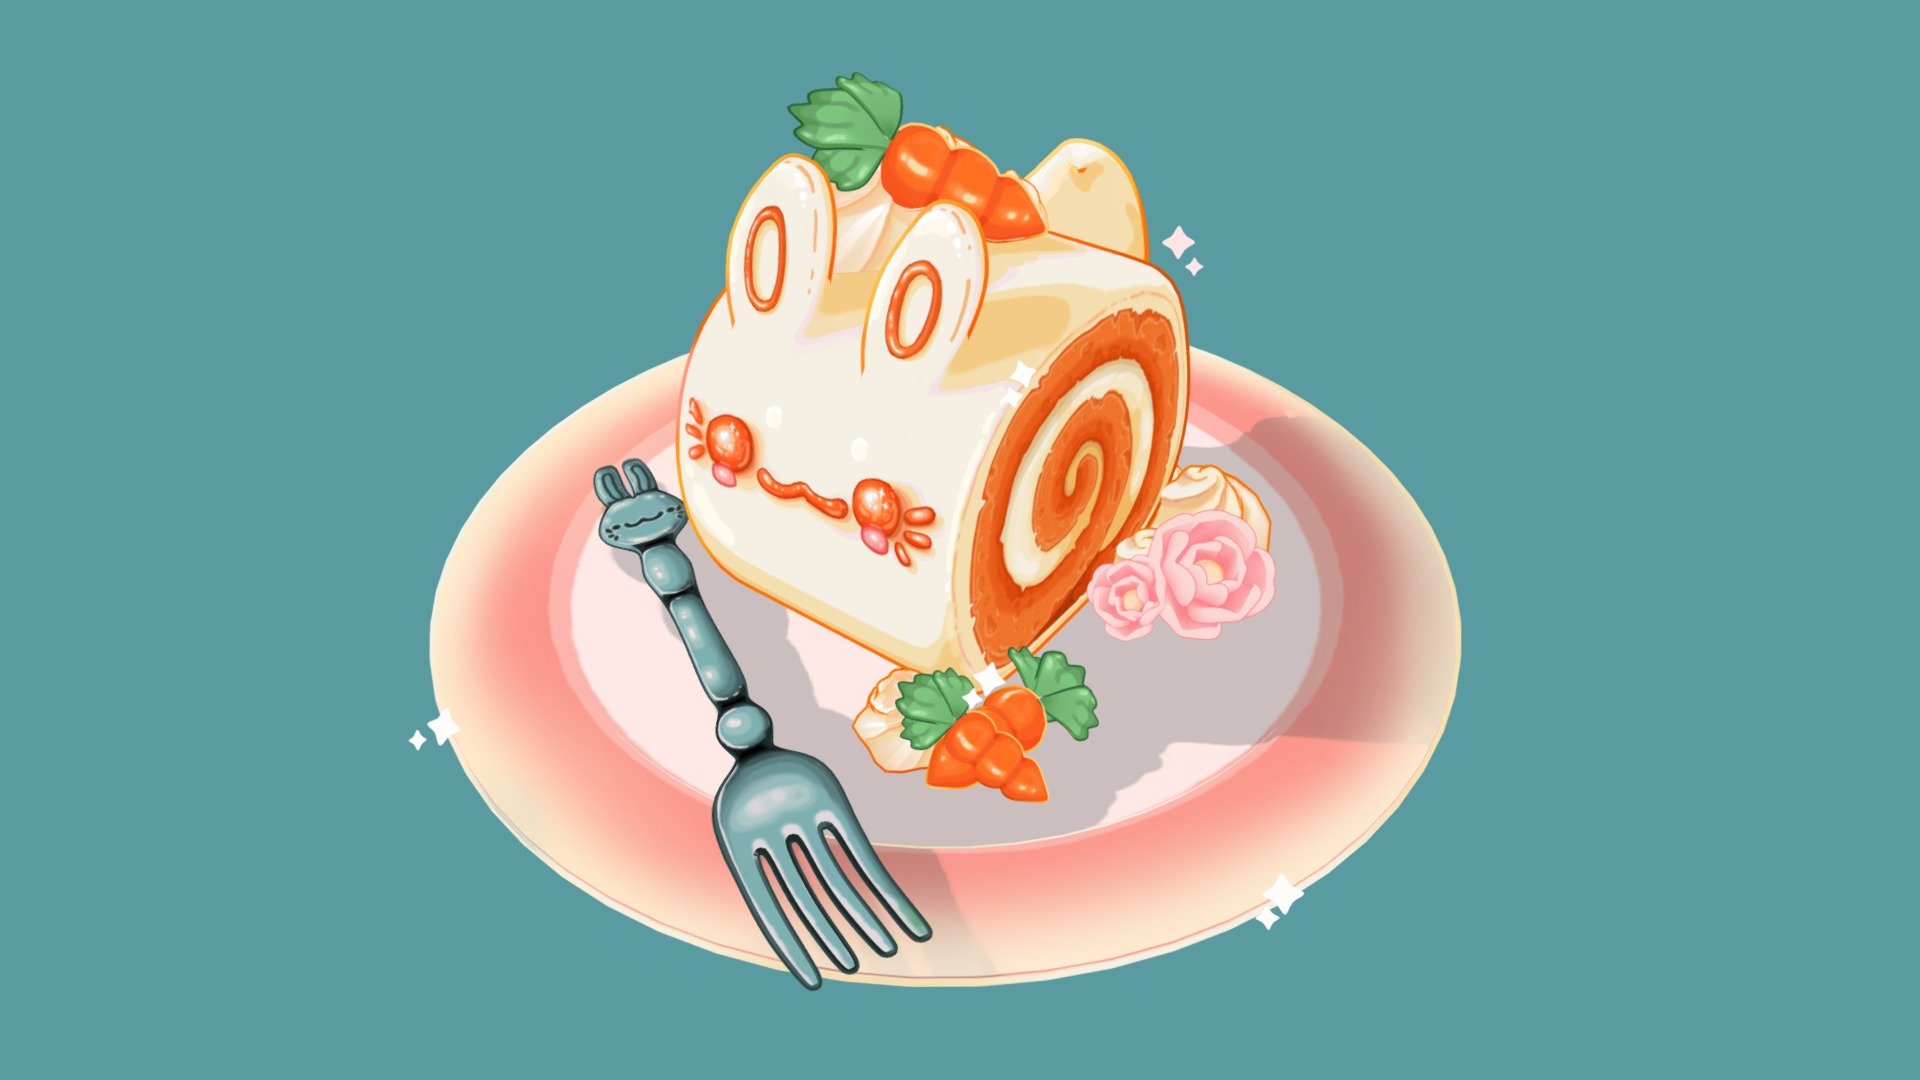 3D model of a 🥕Bunny Carrot Cake Roll🥕.

Model made in Blender with handpainted textures and toon shading.

Check out my Instagram nicole_davisart or Twitter NDavisart to see how the model looks in Blender 3d model